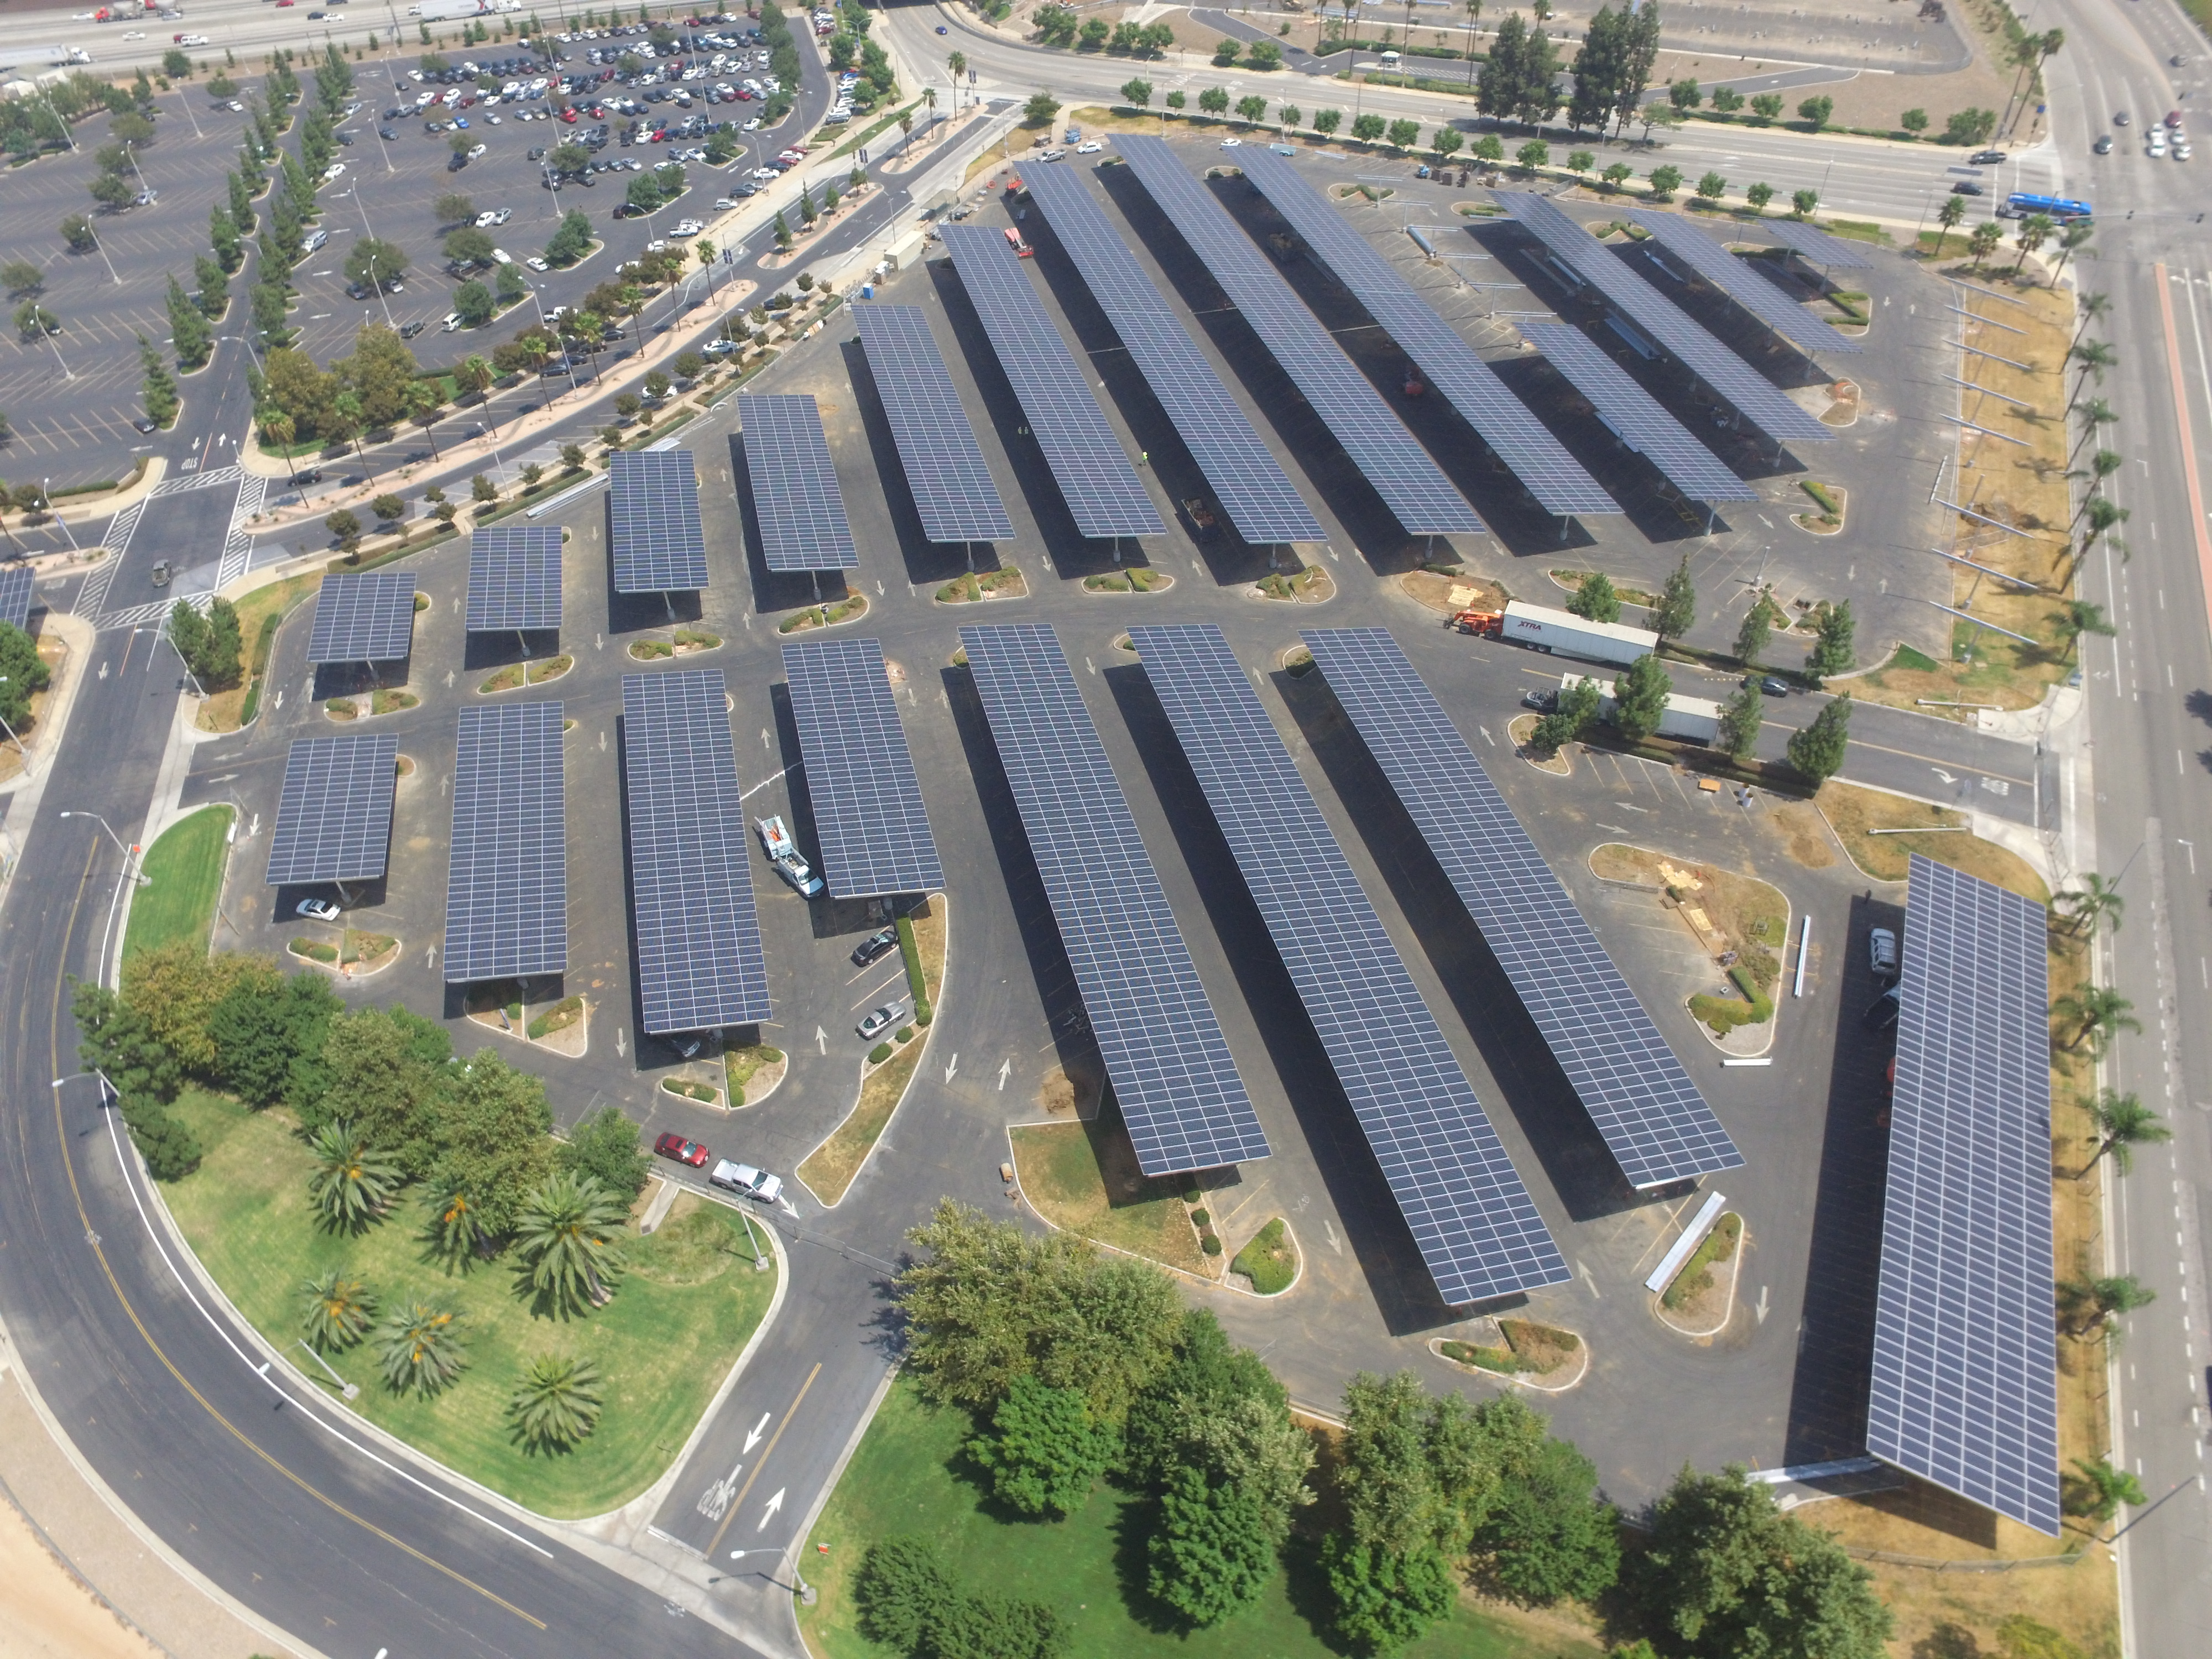 aerial view of solar panels, road and parking lots